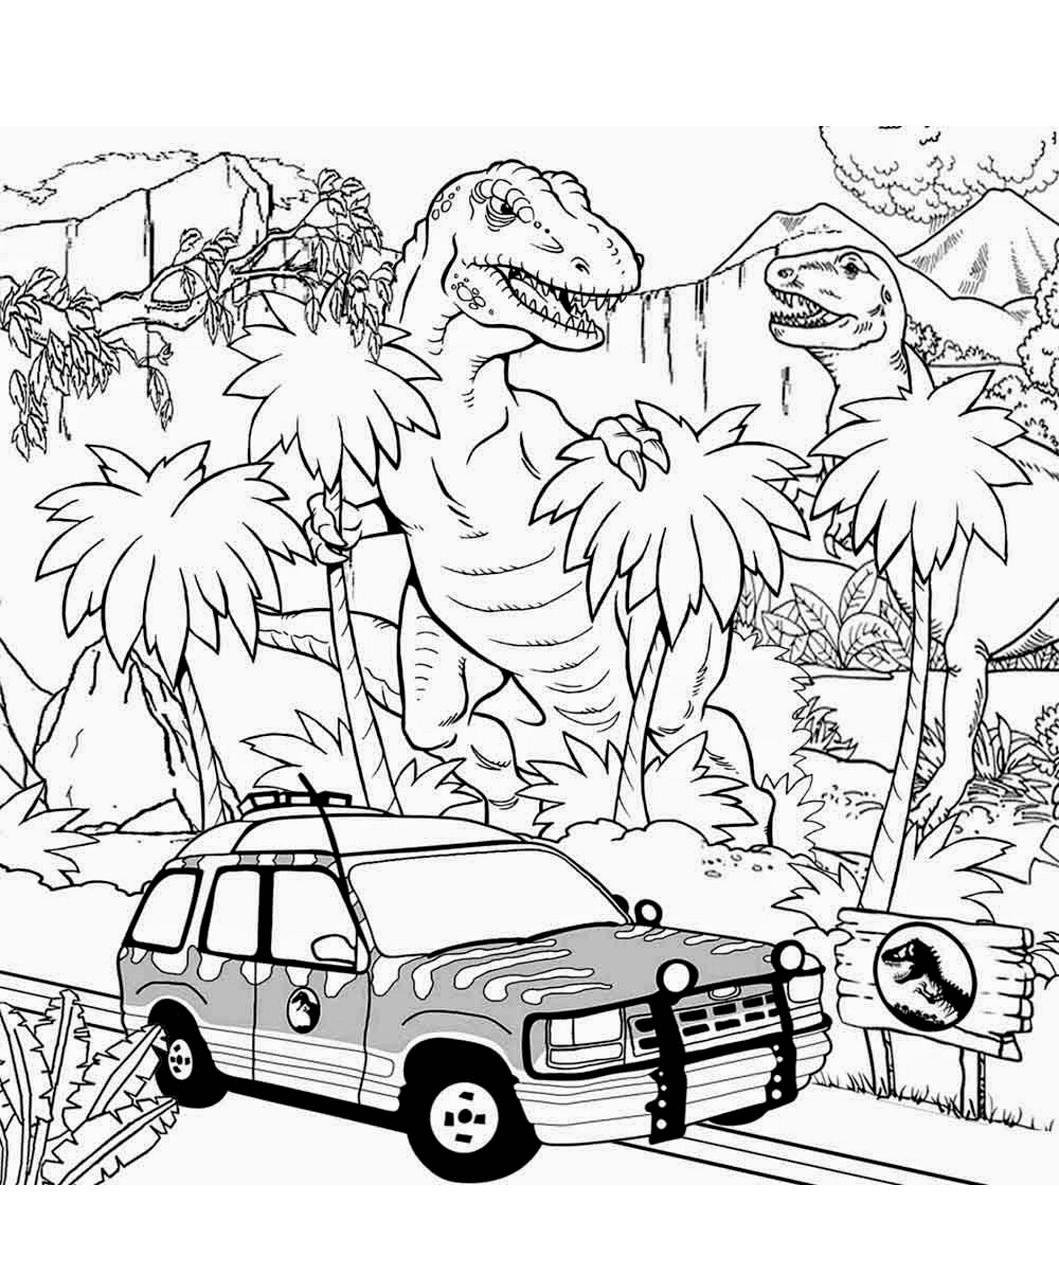 Car In Jurassic World Coloring Page   Free Printable Coloring ...